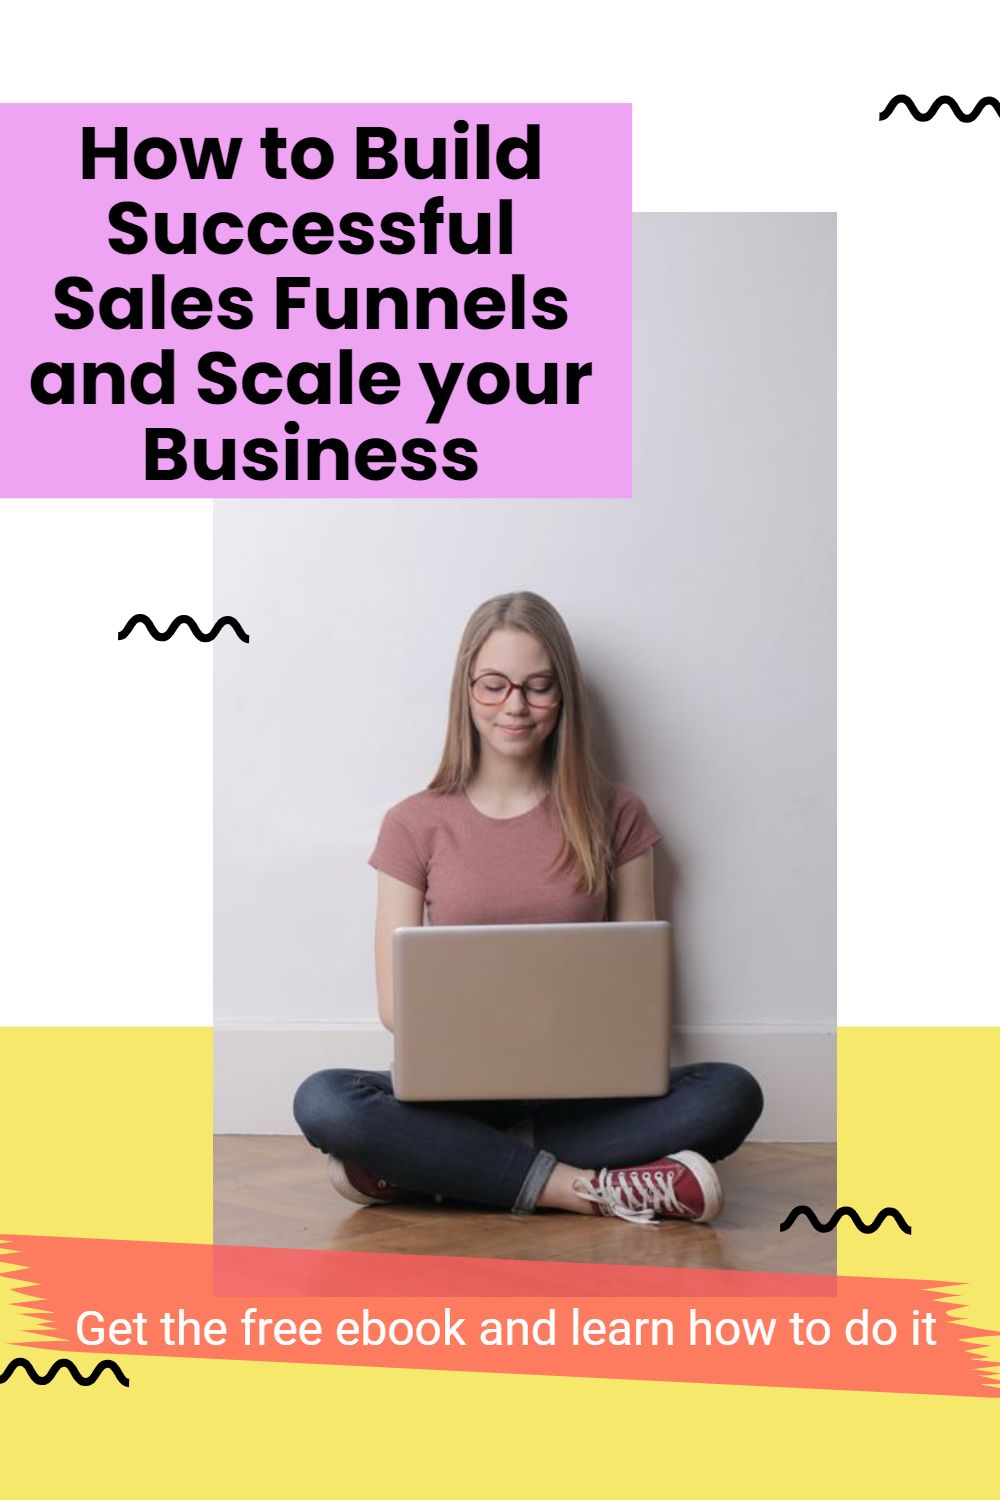 How to Build Successful Sales Funnels and Scale your Business